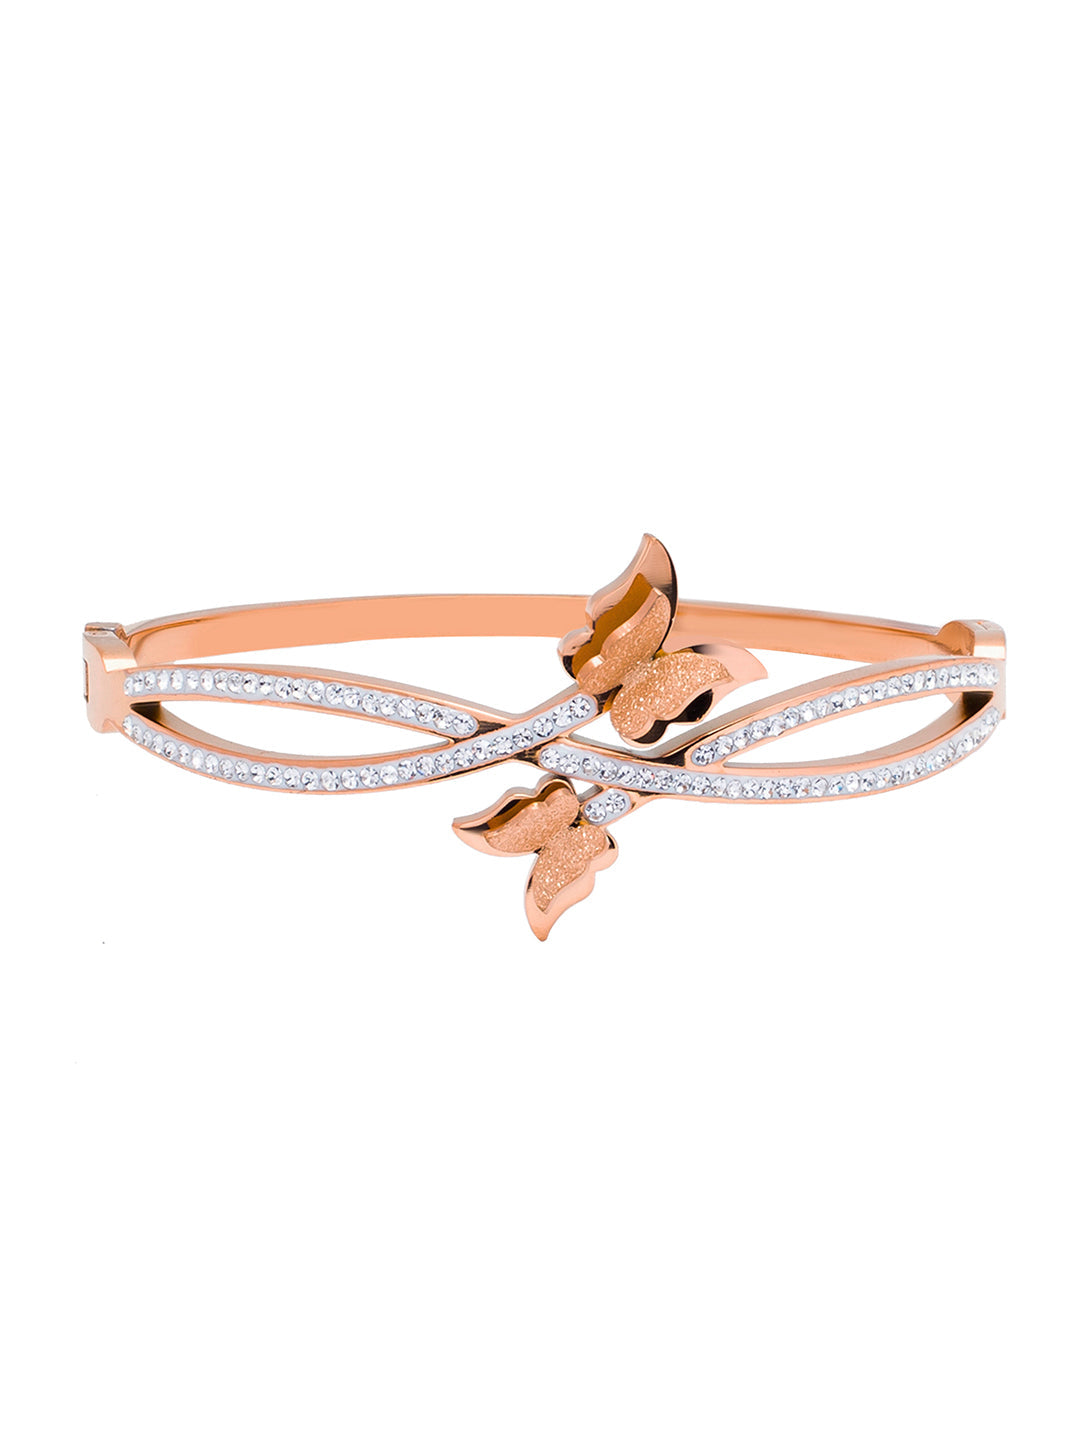 The Cape Cod Double Ball Bracelet available in sterling silver and 14k gold.  – Cape Cod Jewelers